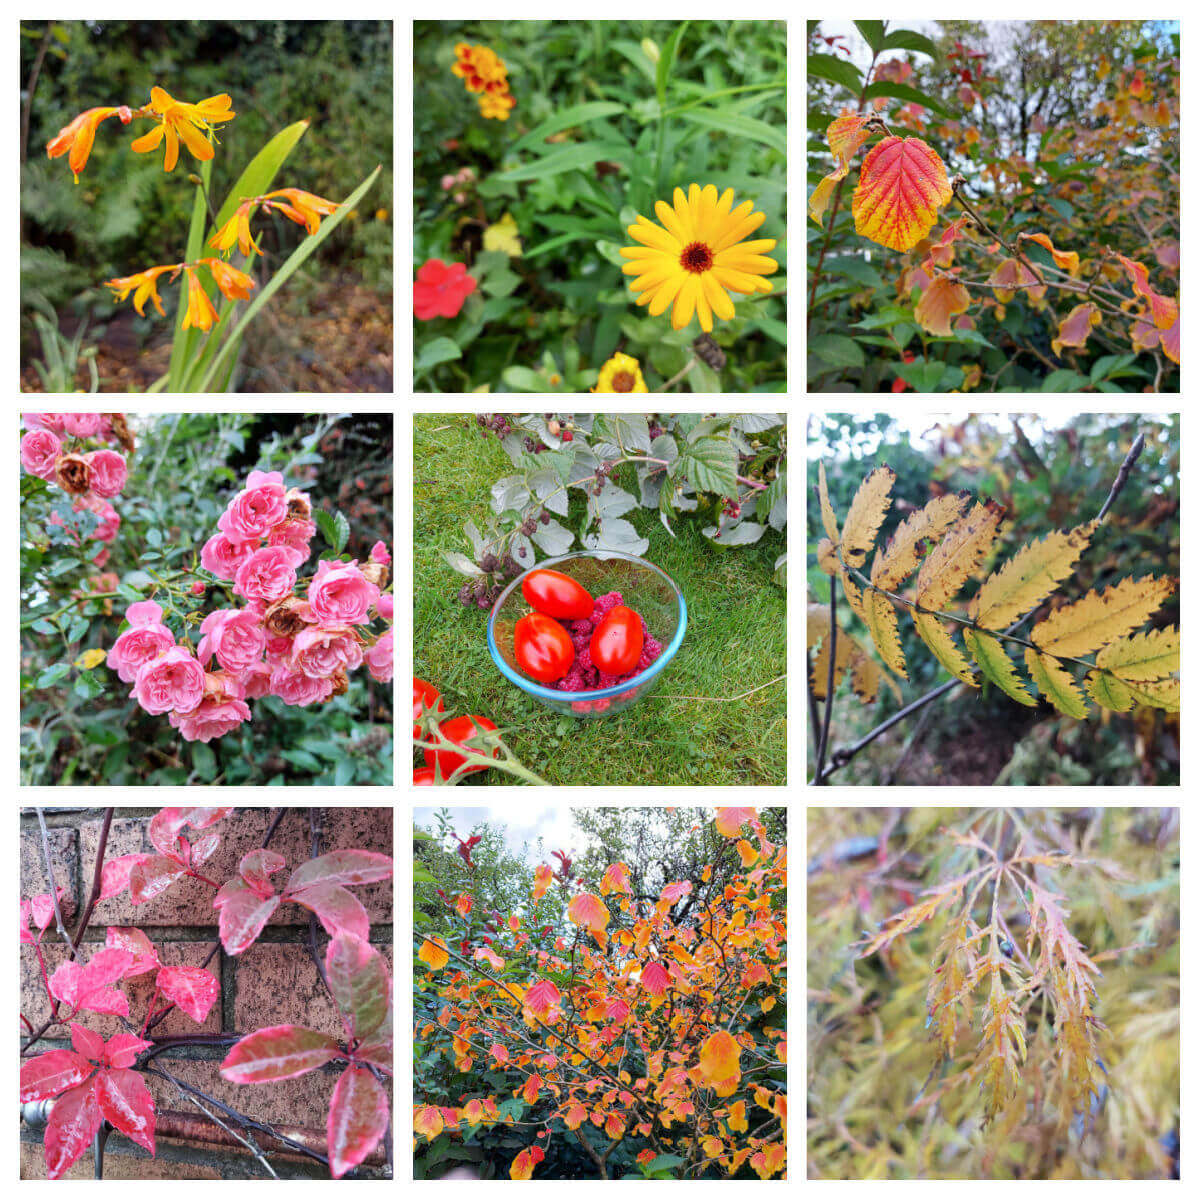 A collage of nine squares featuring colourful plants from the garden, mostly in shades of yellow, orange and pink. In the centre square is a bowl of tomatoes.